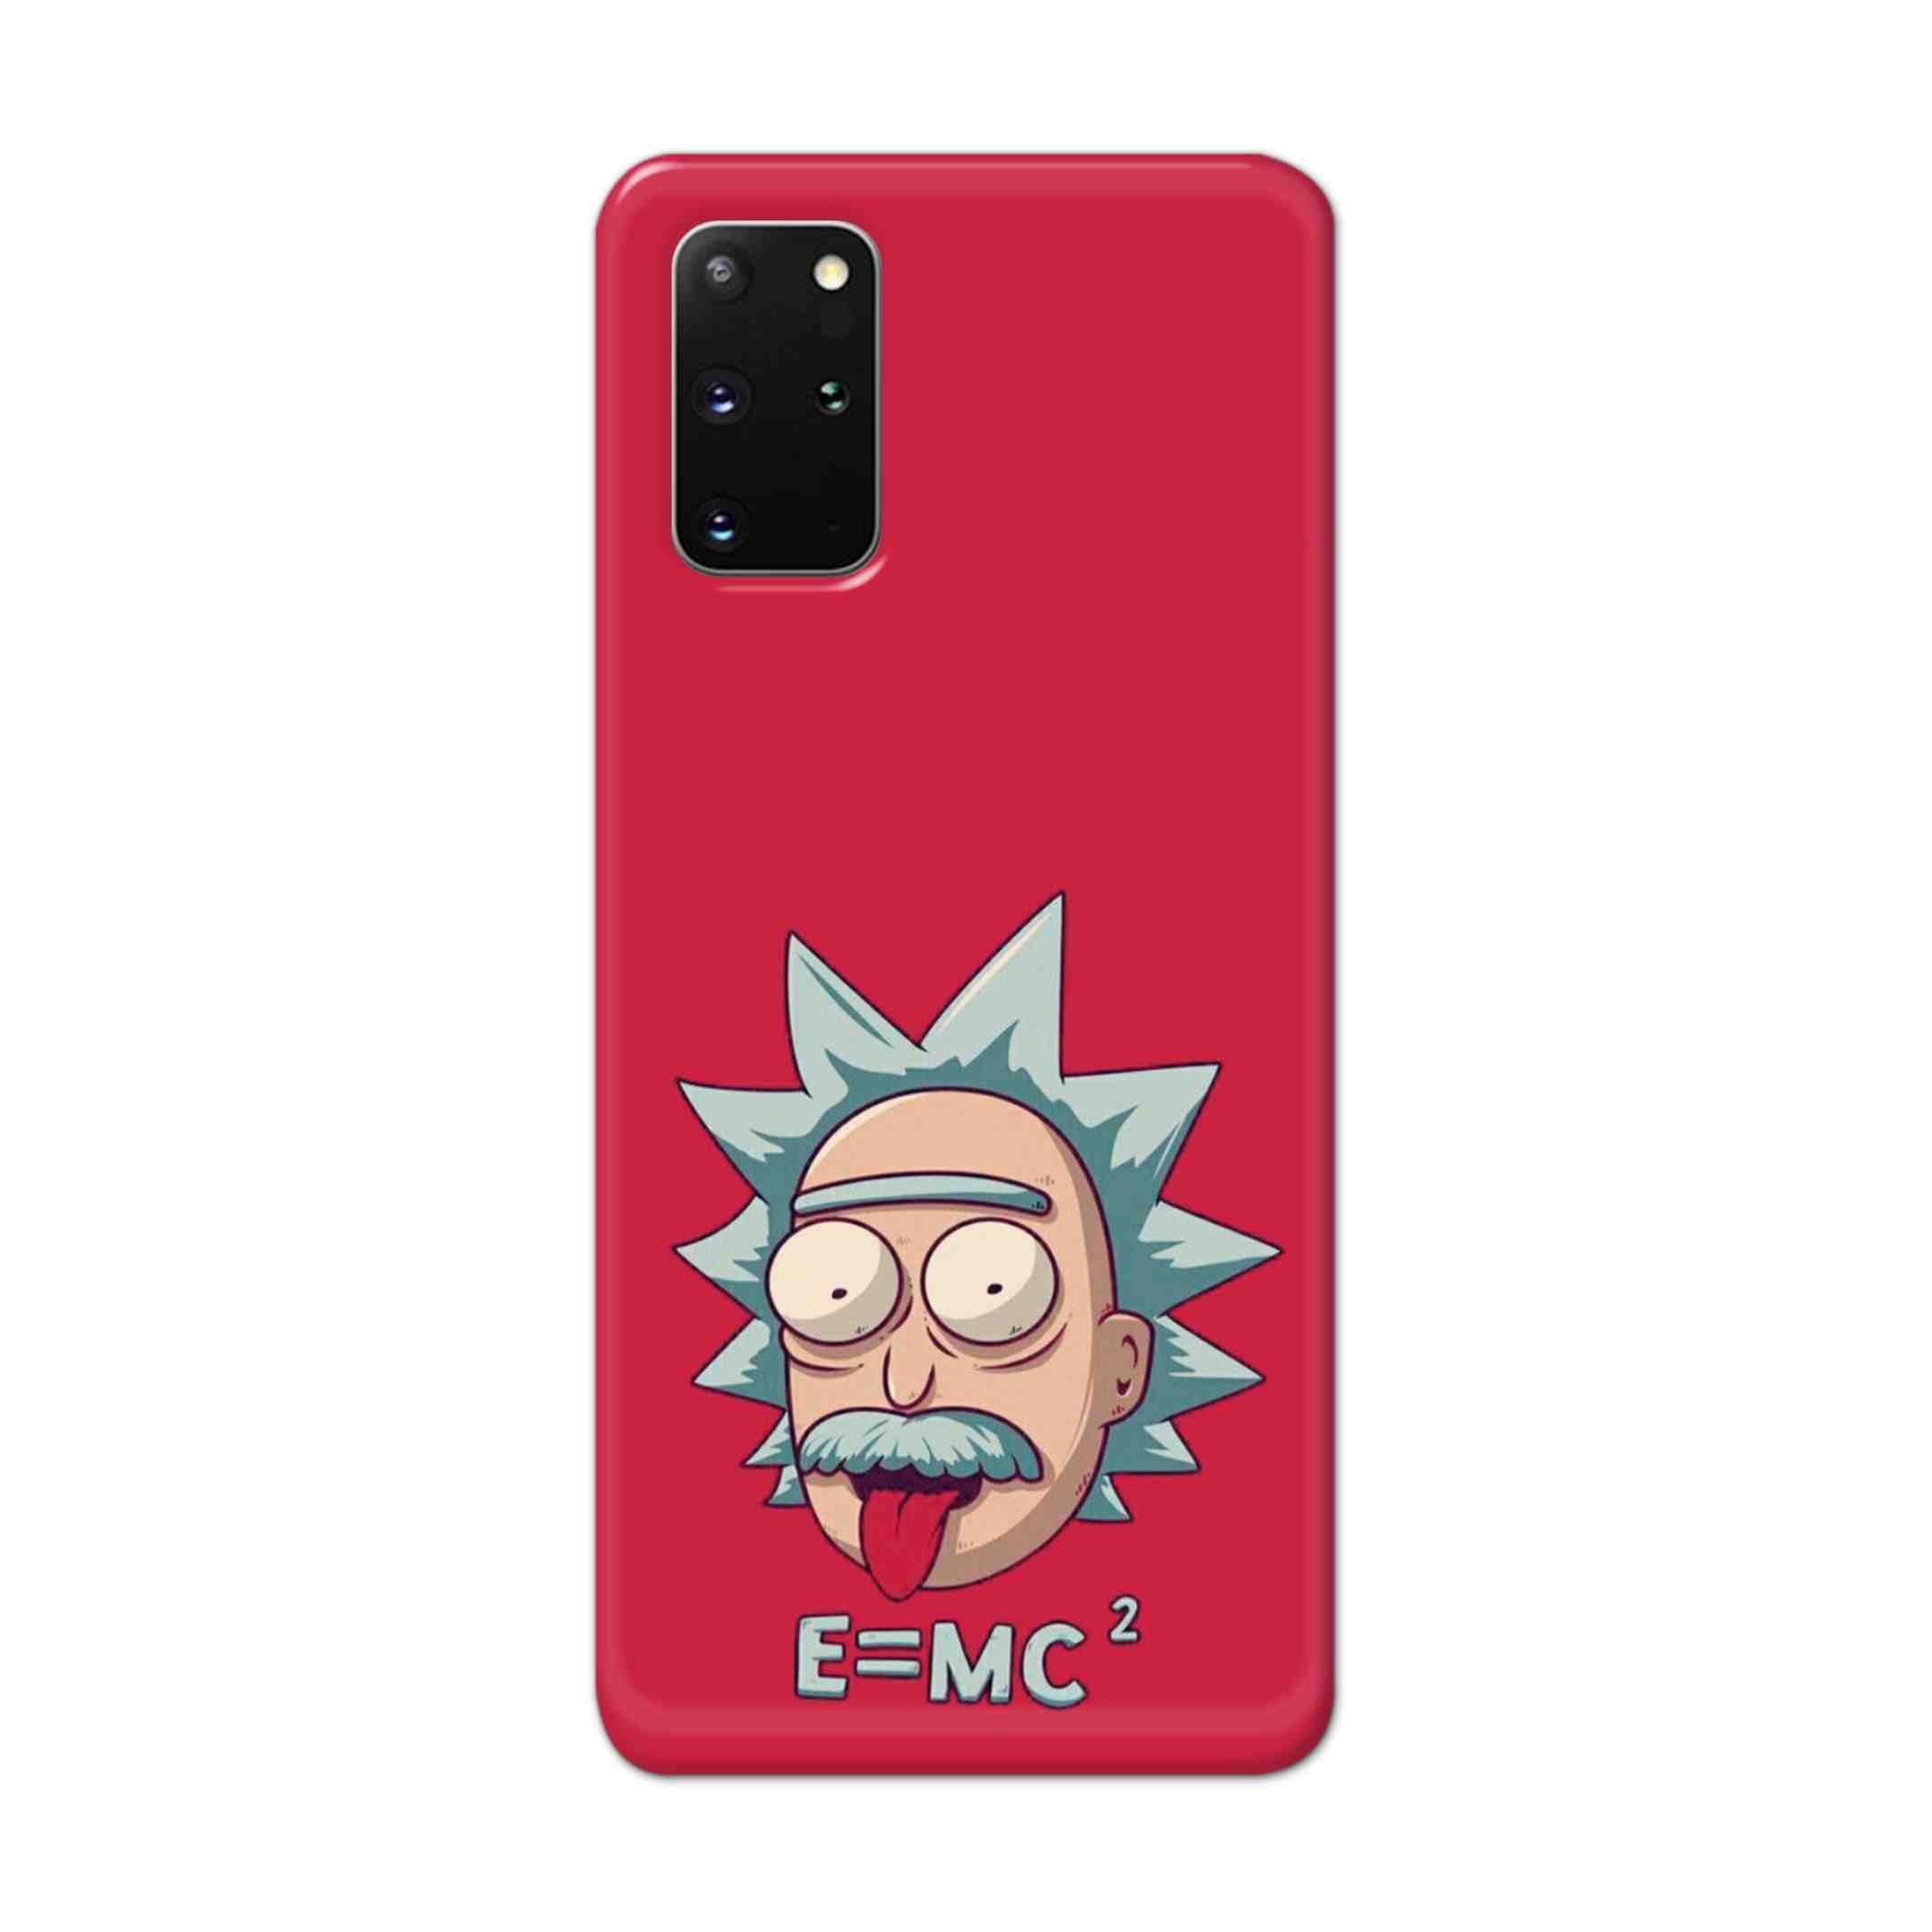 Buy E=Mc Hard Back Mobile Phone Case Cover For Samsung Galaxy S20 Plus Online